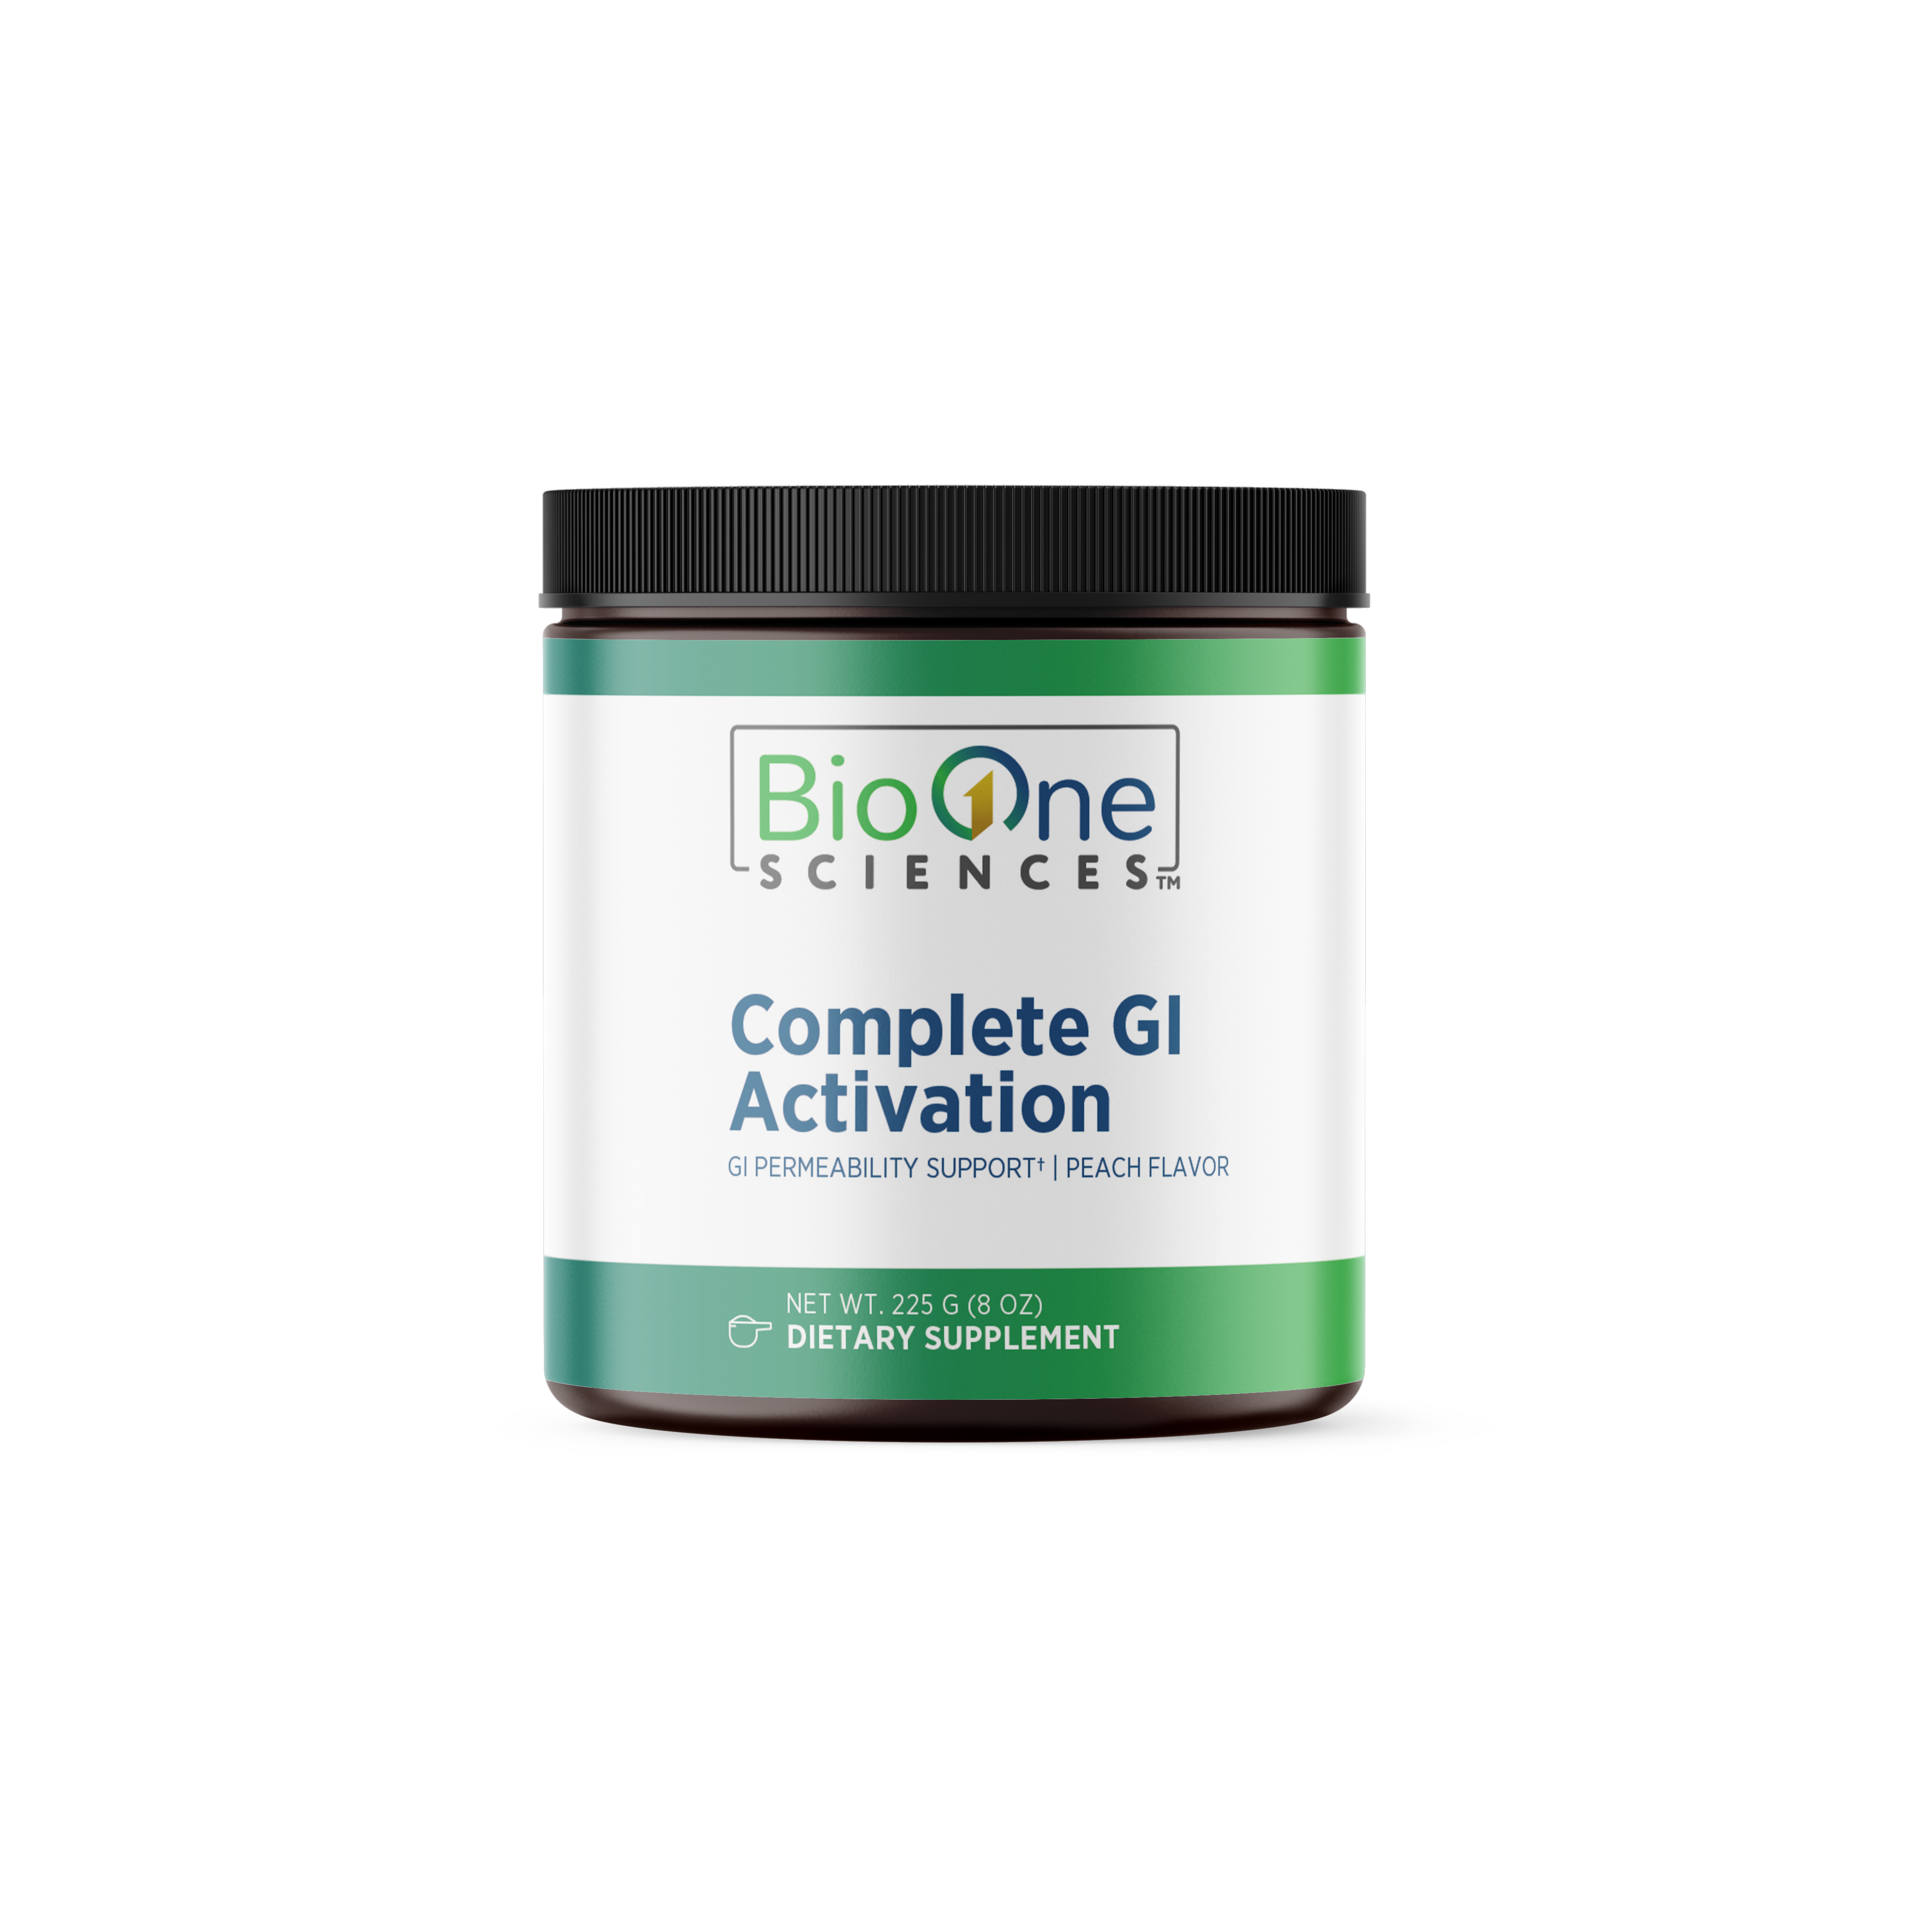 Complete GI Activation